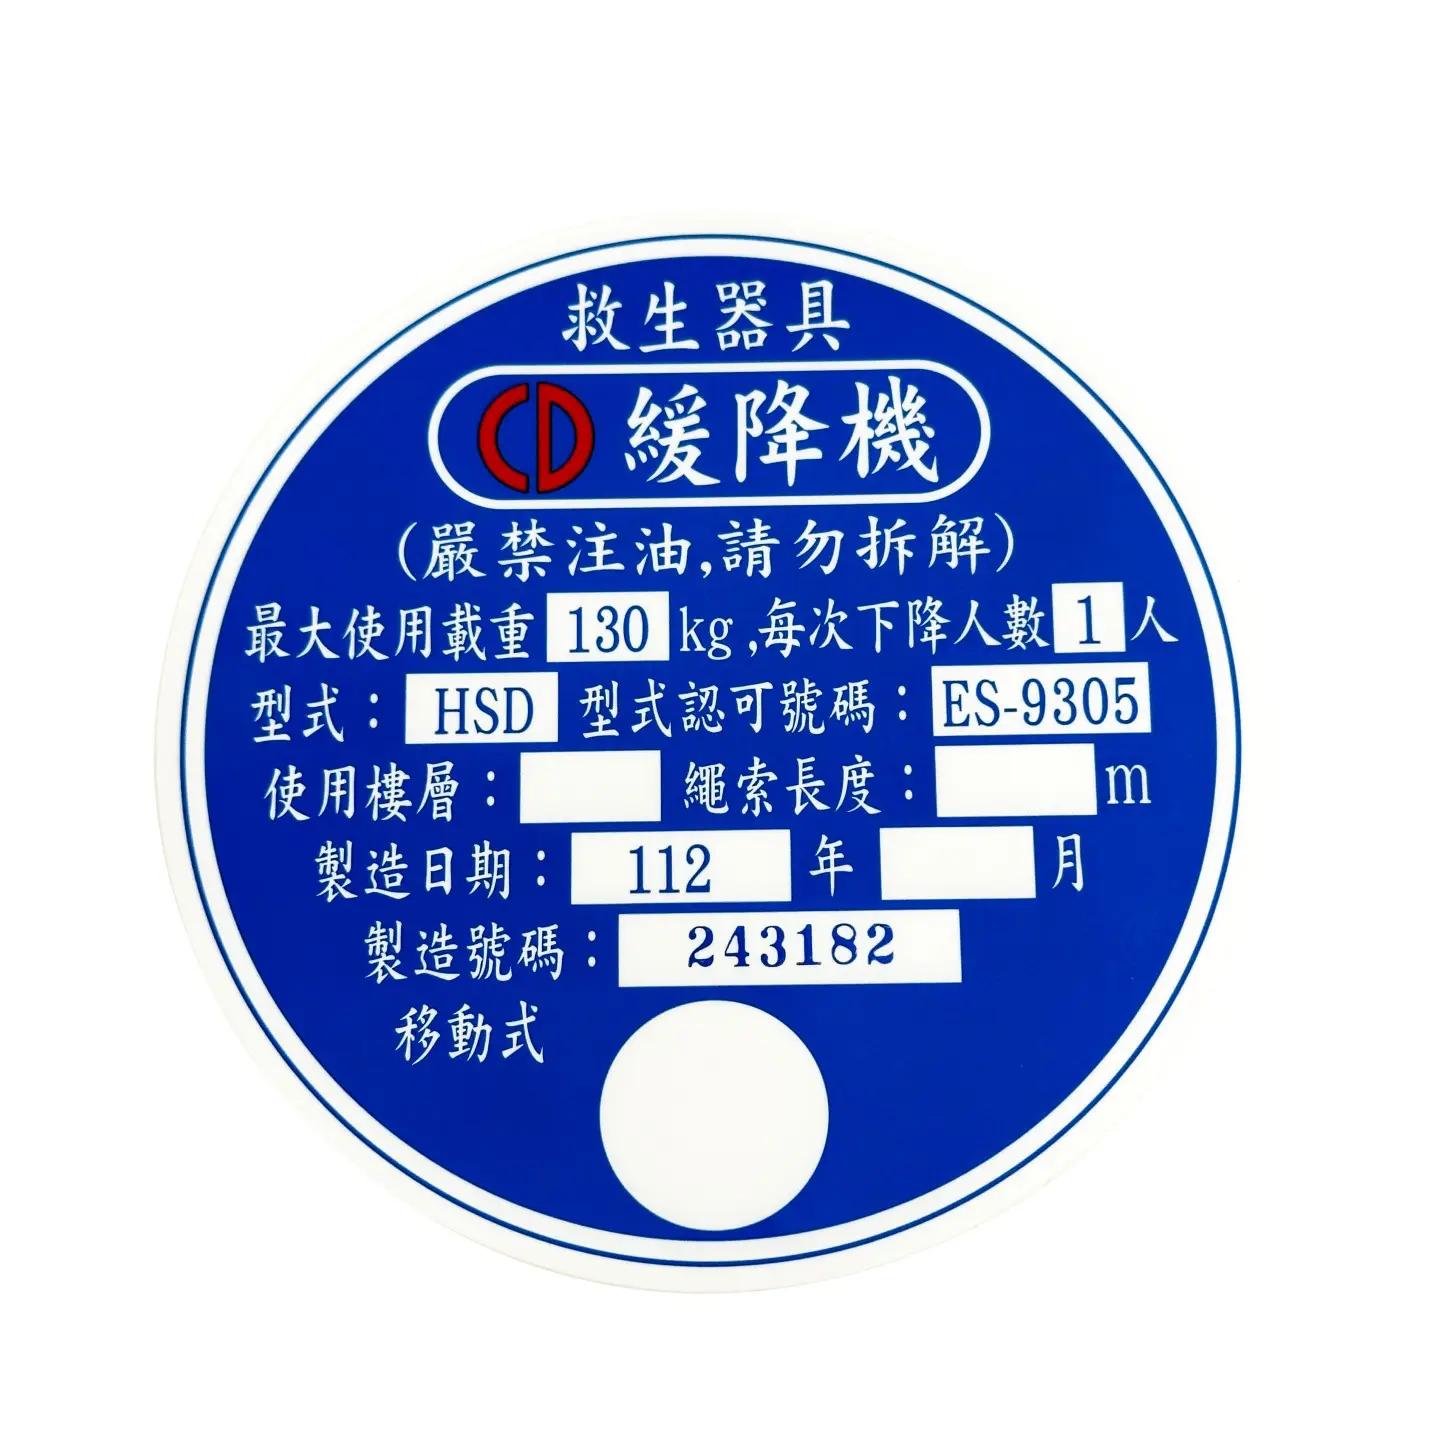 Serial number tag sticker